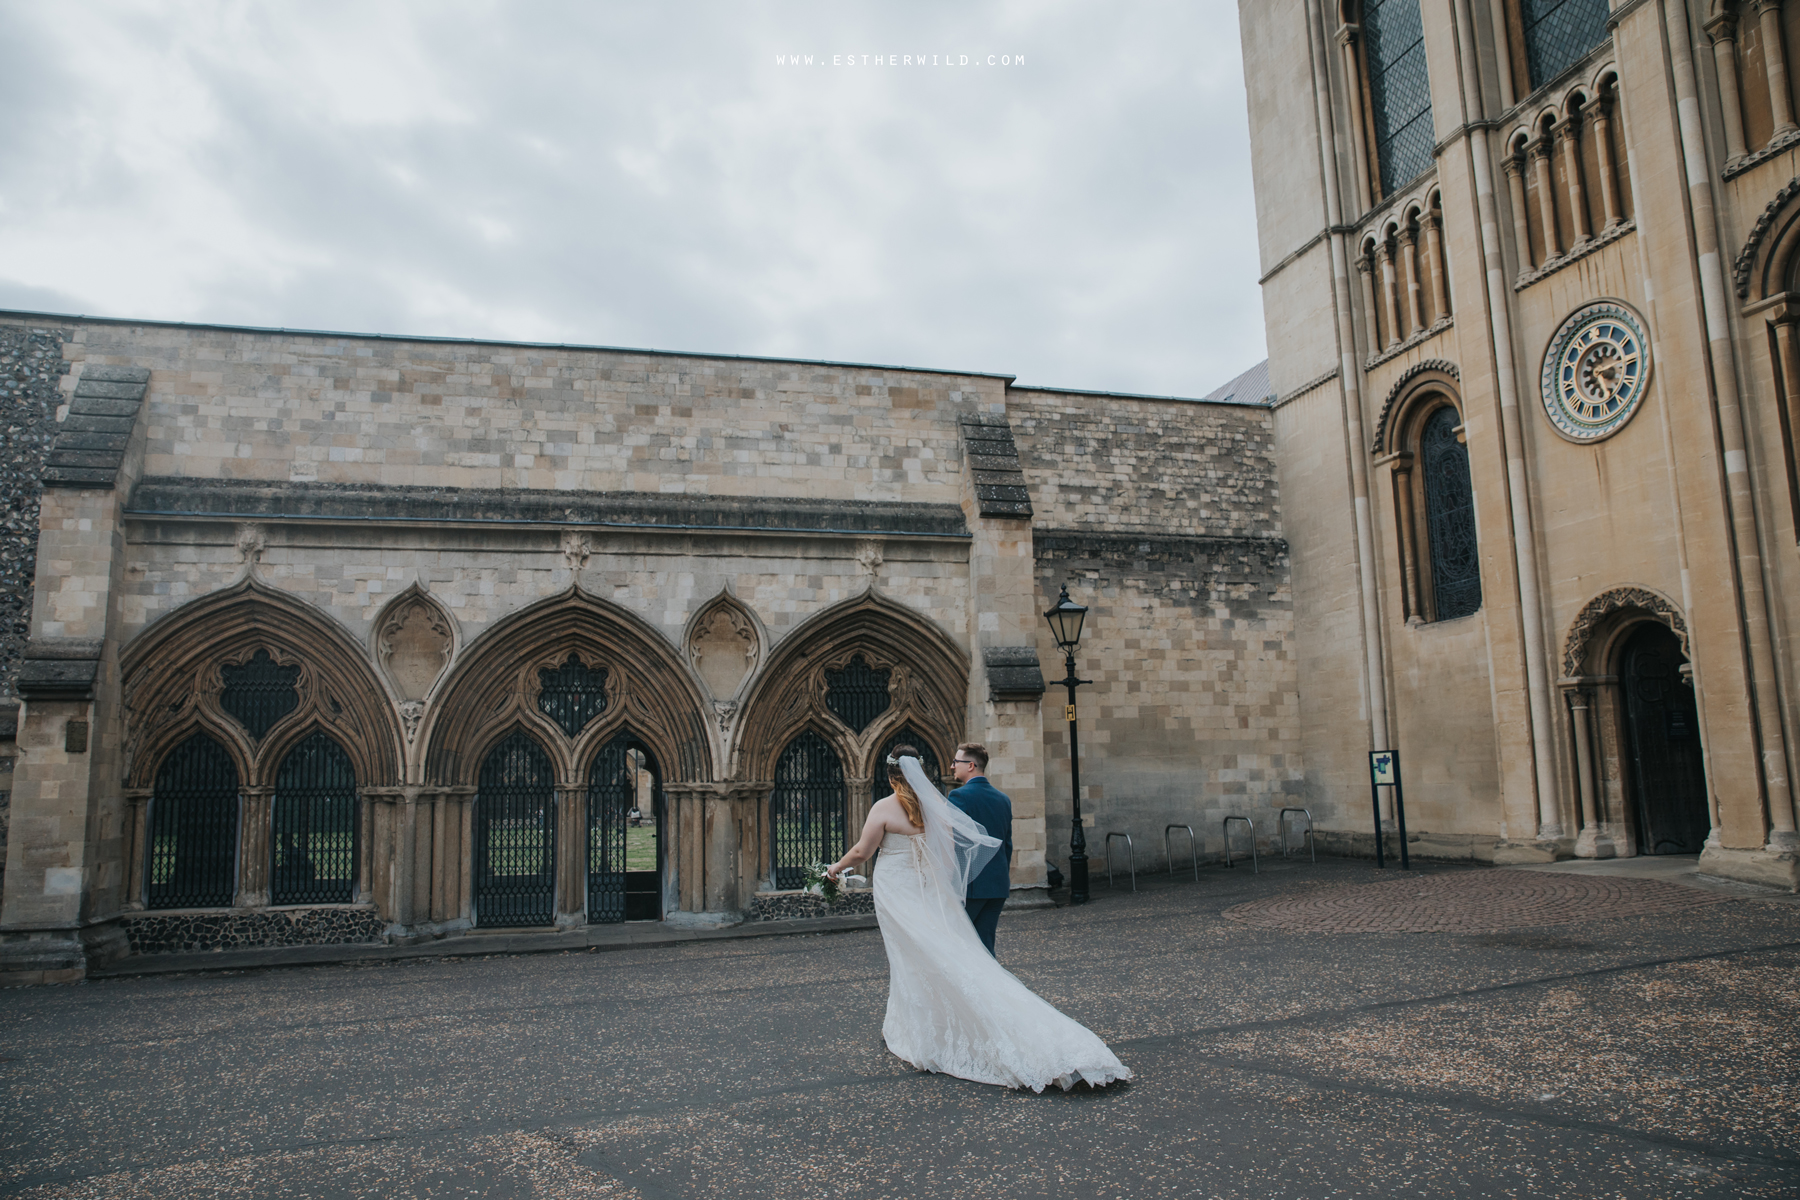 Norwich_Castle_Arcade_Grosvenor_Chip_Birdcage_Cathedral_Cloisters_Refectory_Wedding_Photography_Esther_Wild_Photographer_Norfolk_Kings_Lynn_3R8A1958.jpg